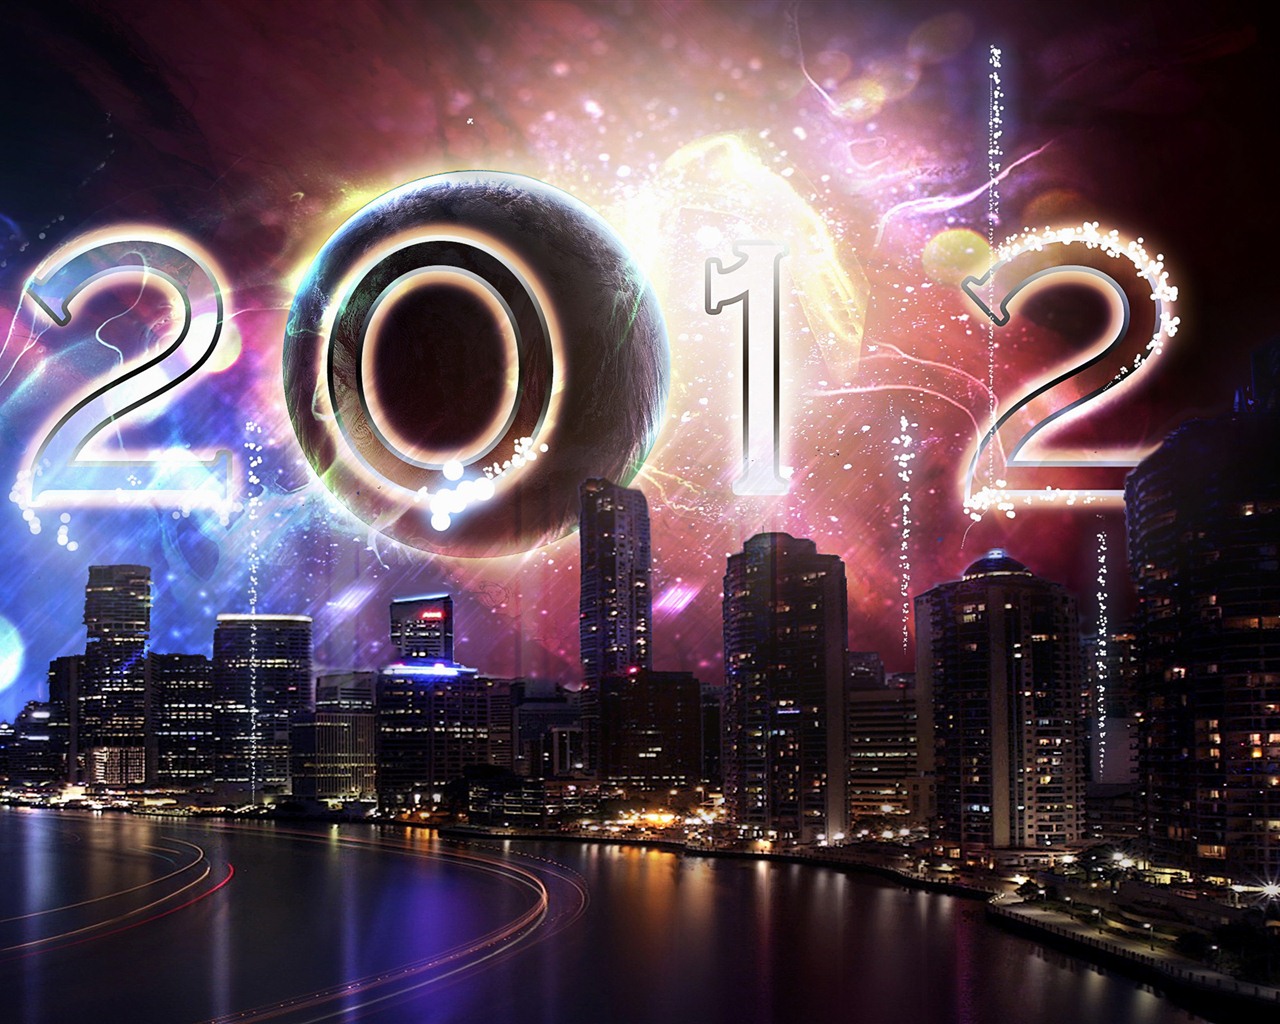 2012 New Year wallpapers (1) #1 - 1280x1024